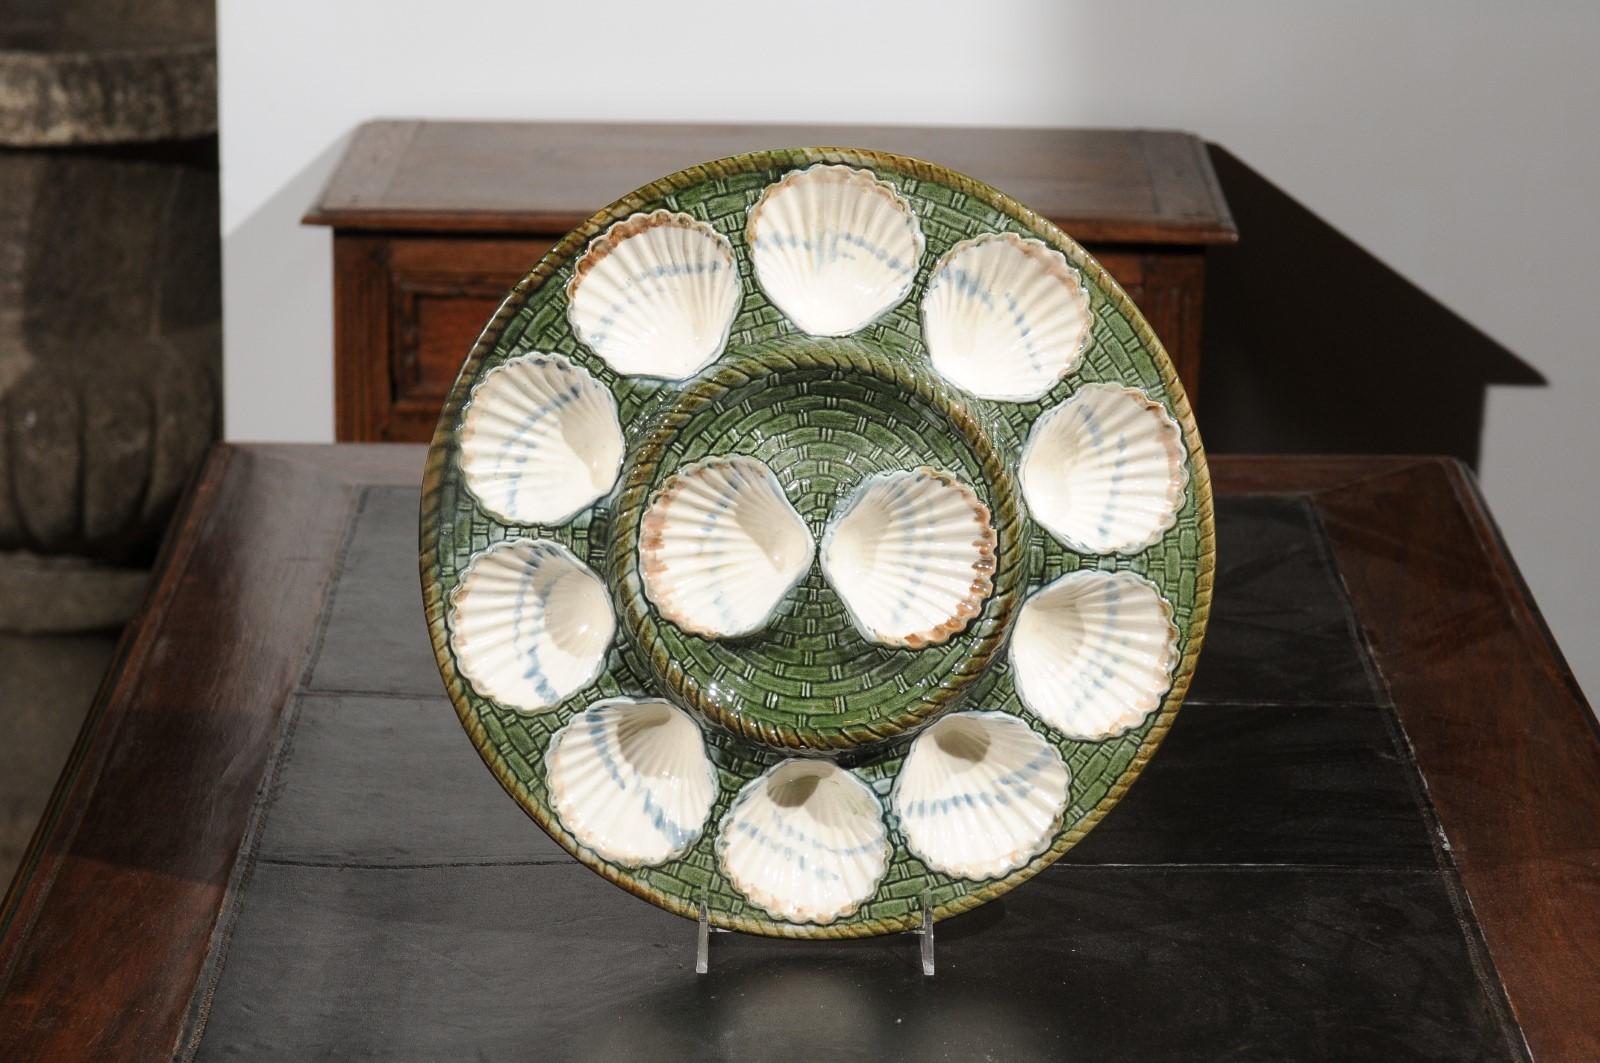 A French majolica Longchamp Terre de Fer scallop platter from the 19th century with green and brown accents. Born in France during the 19th century, this scallop platter presents a green, white and brown décor accented with 12 scallop shells.